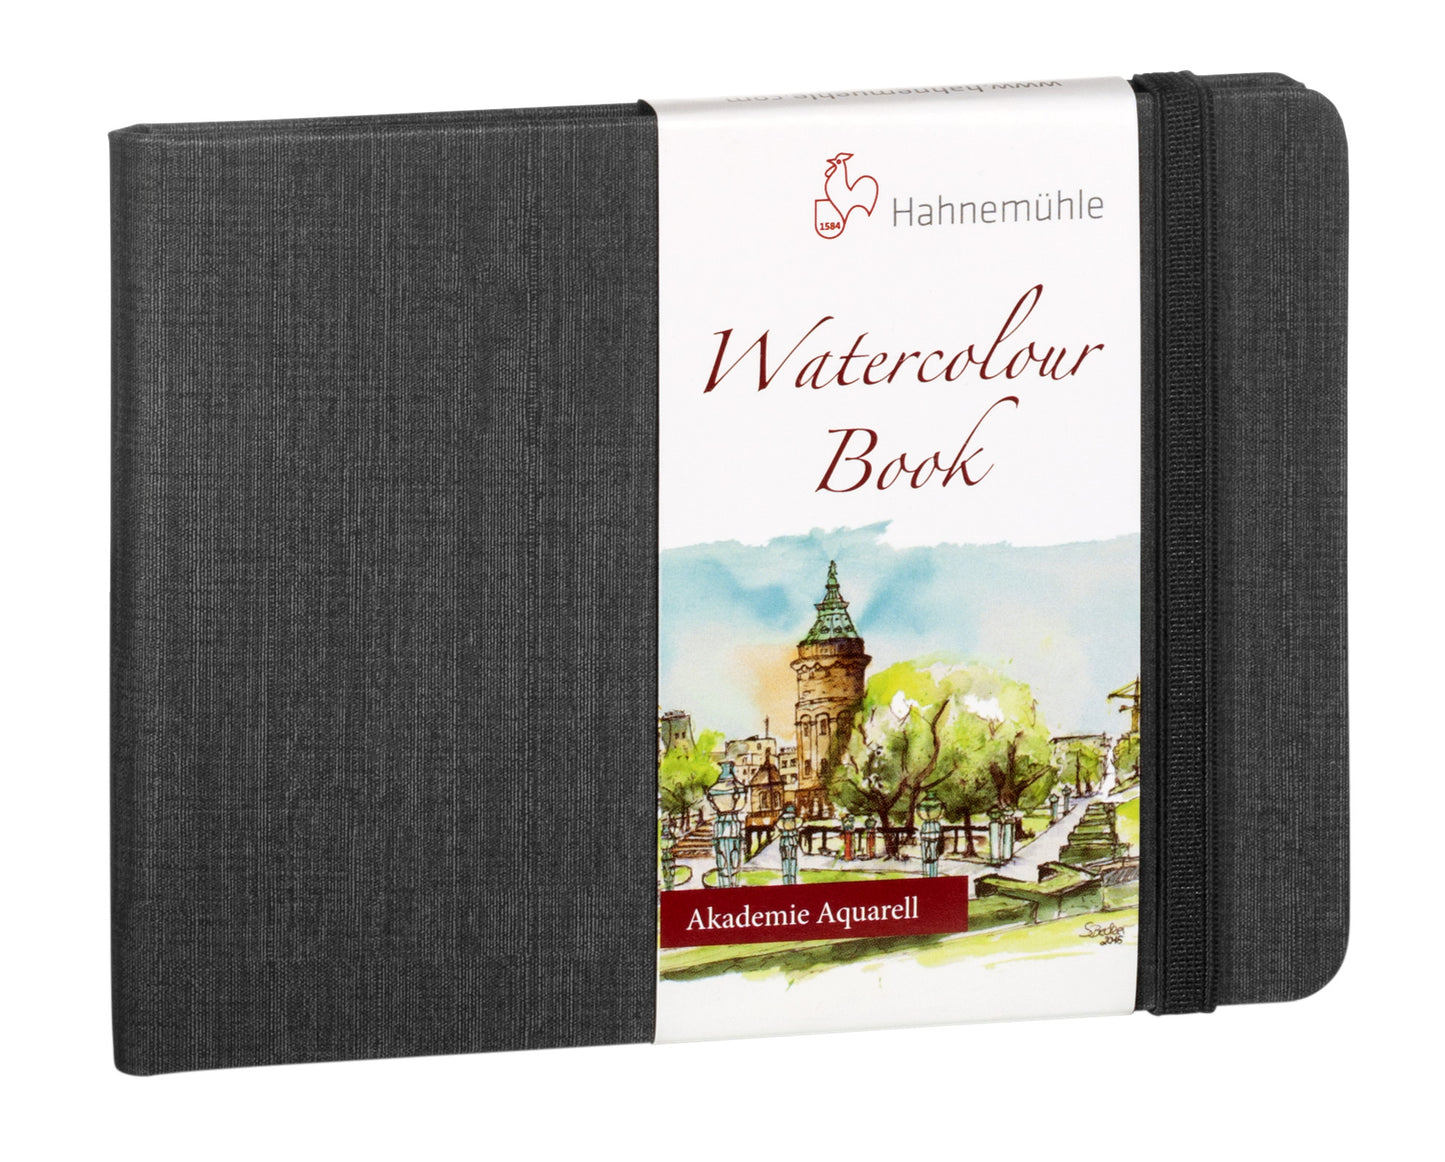 A5 (landscape) Akademie Watercolour Book by Hahnemuhle